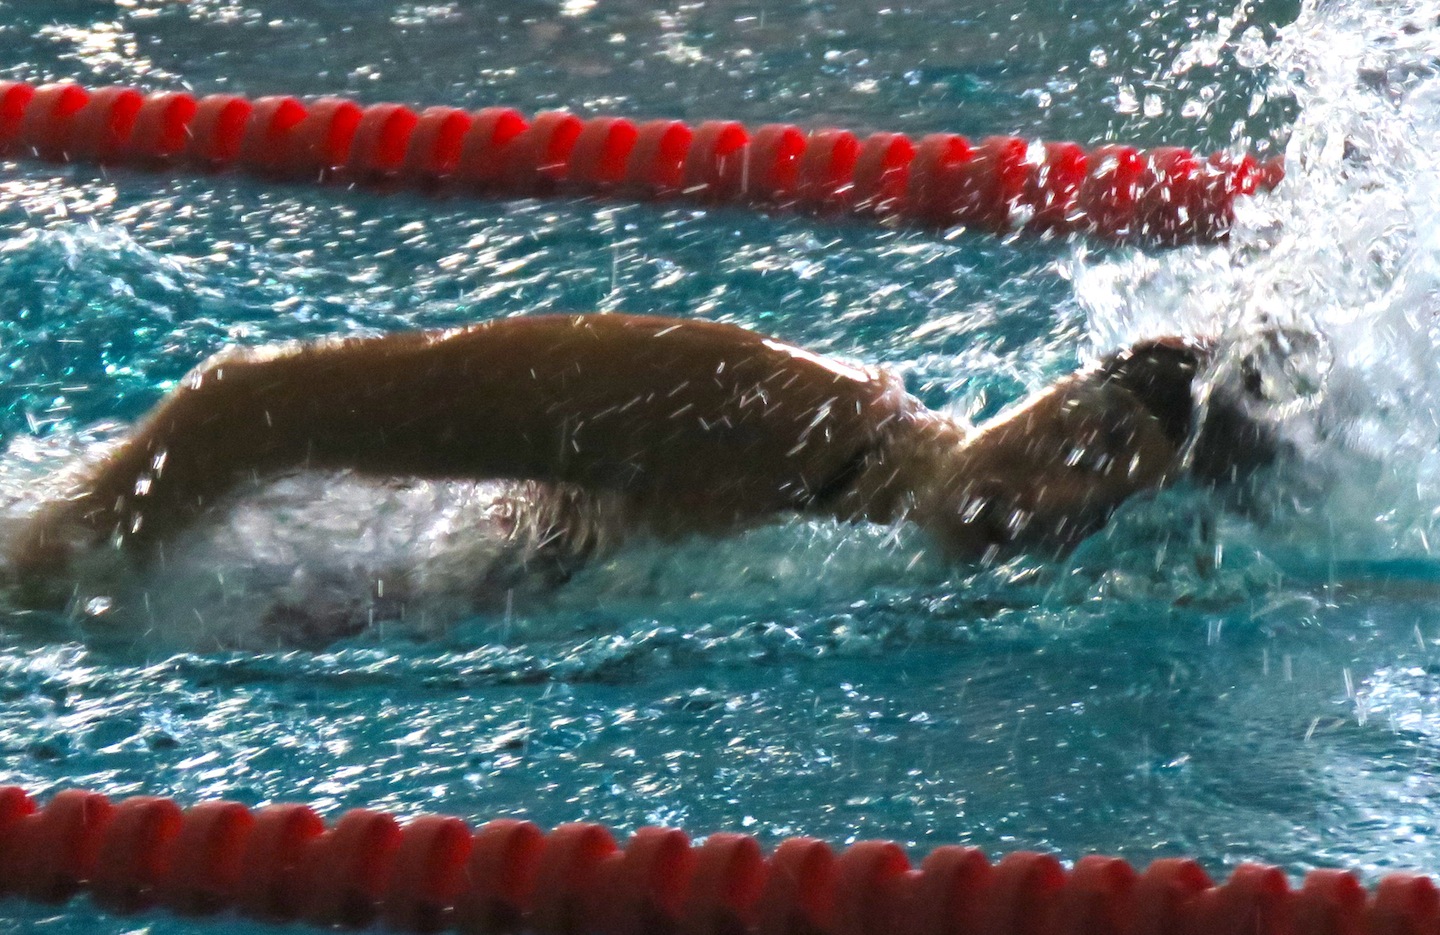 Danielle Carlson swims during a meet versus Lewiston-Porter last Friday. Carlson won the 200-yard freestyle with a time of 2:01.07, the 100-yard freestyle with a time of 55.05 and was part of the 200-yard freestyle relay team, which took first place with a time of 1:48.34. (Photo by David Yarger)